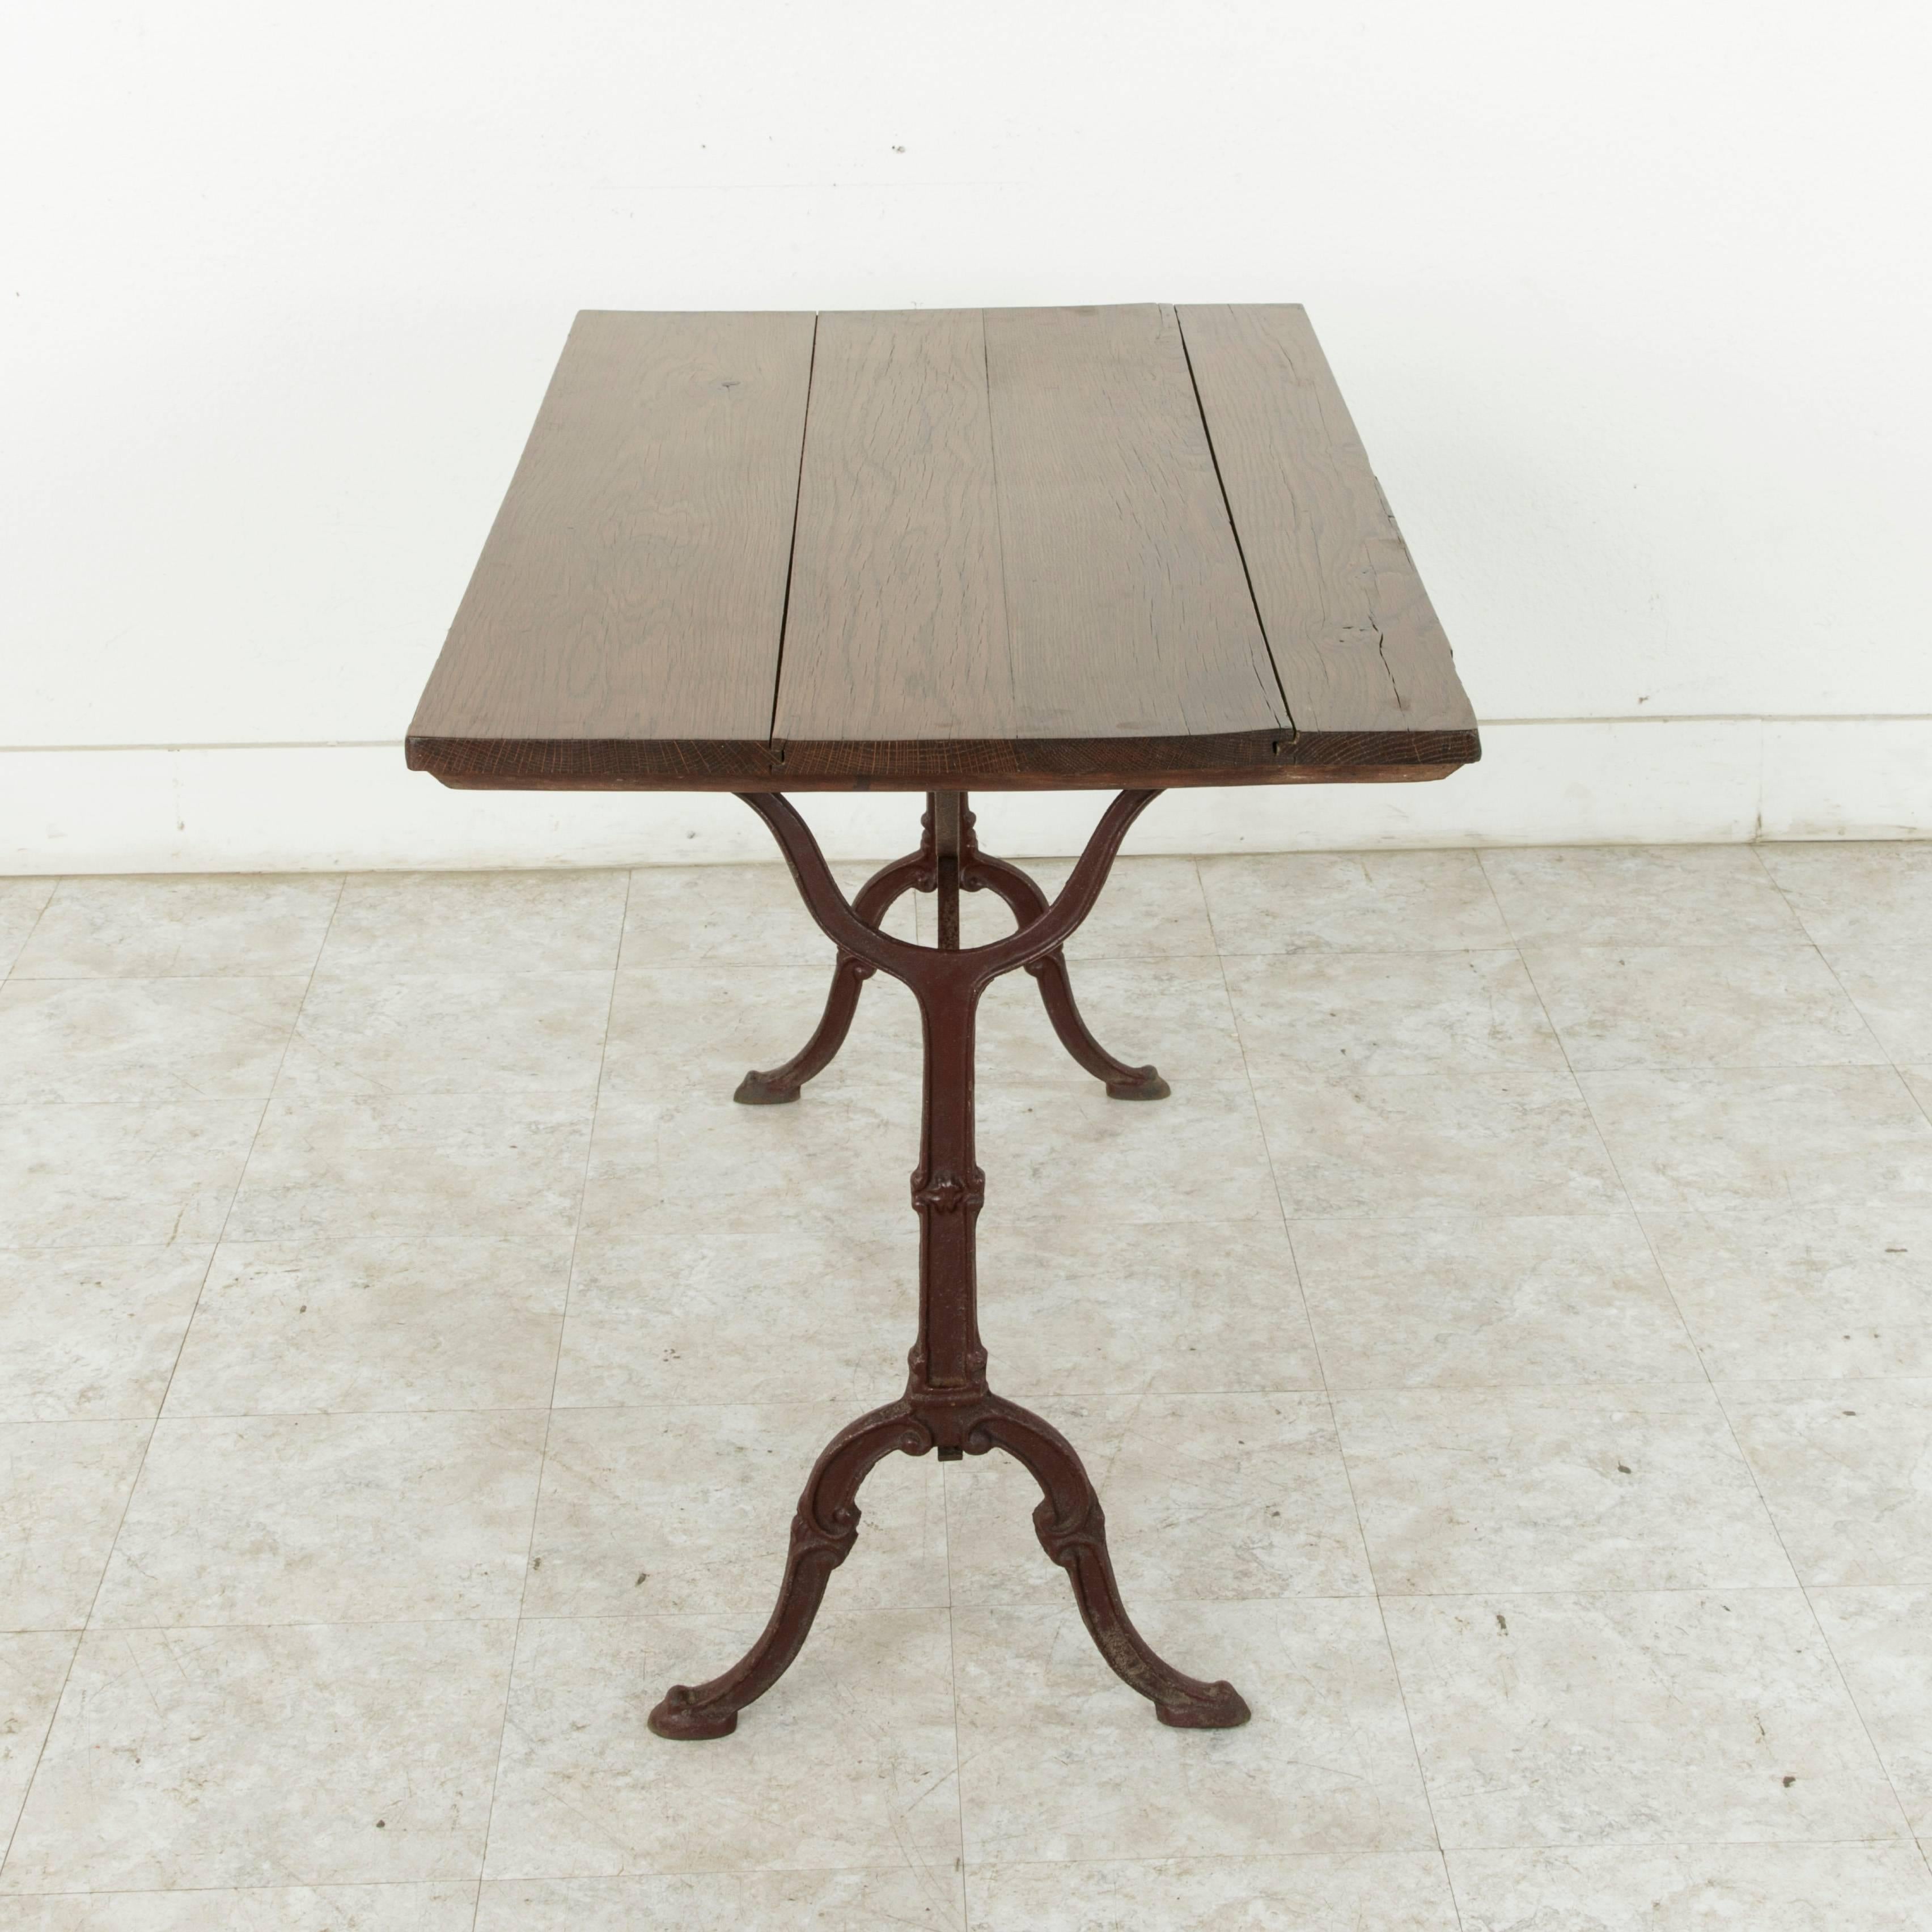 Early 20th Century French Cast Iron Bistro Table or Cafe Table with Oak Top, circa 1900